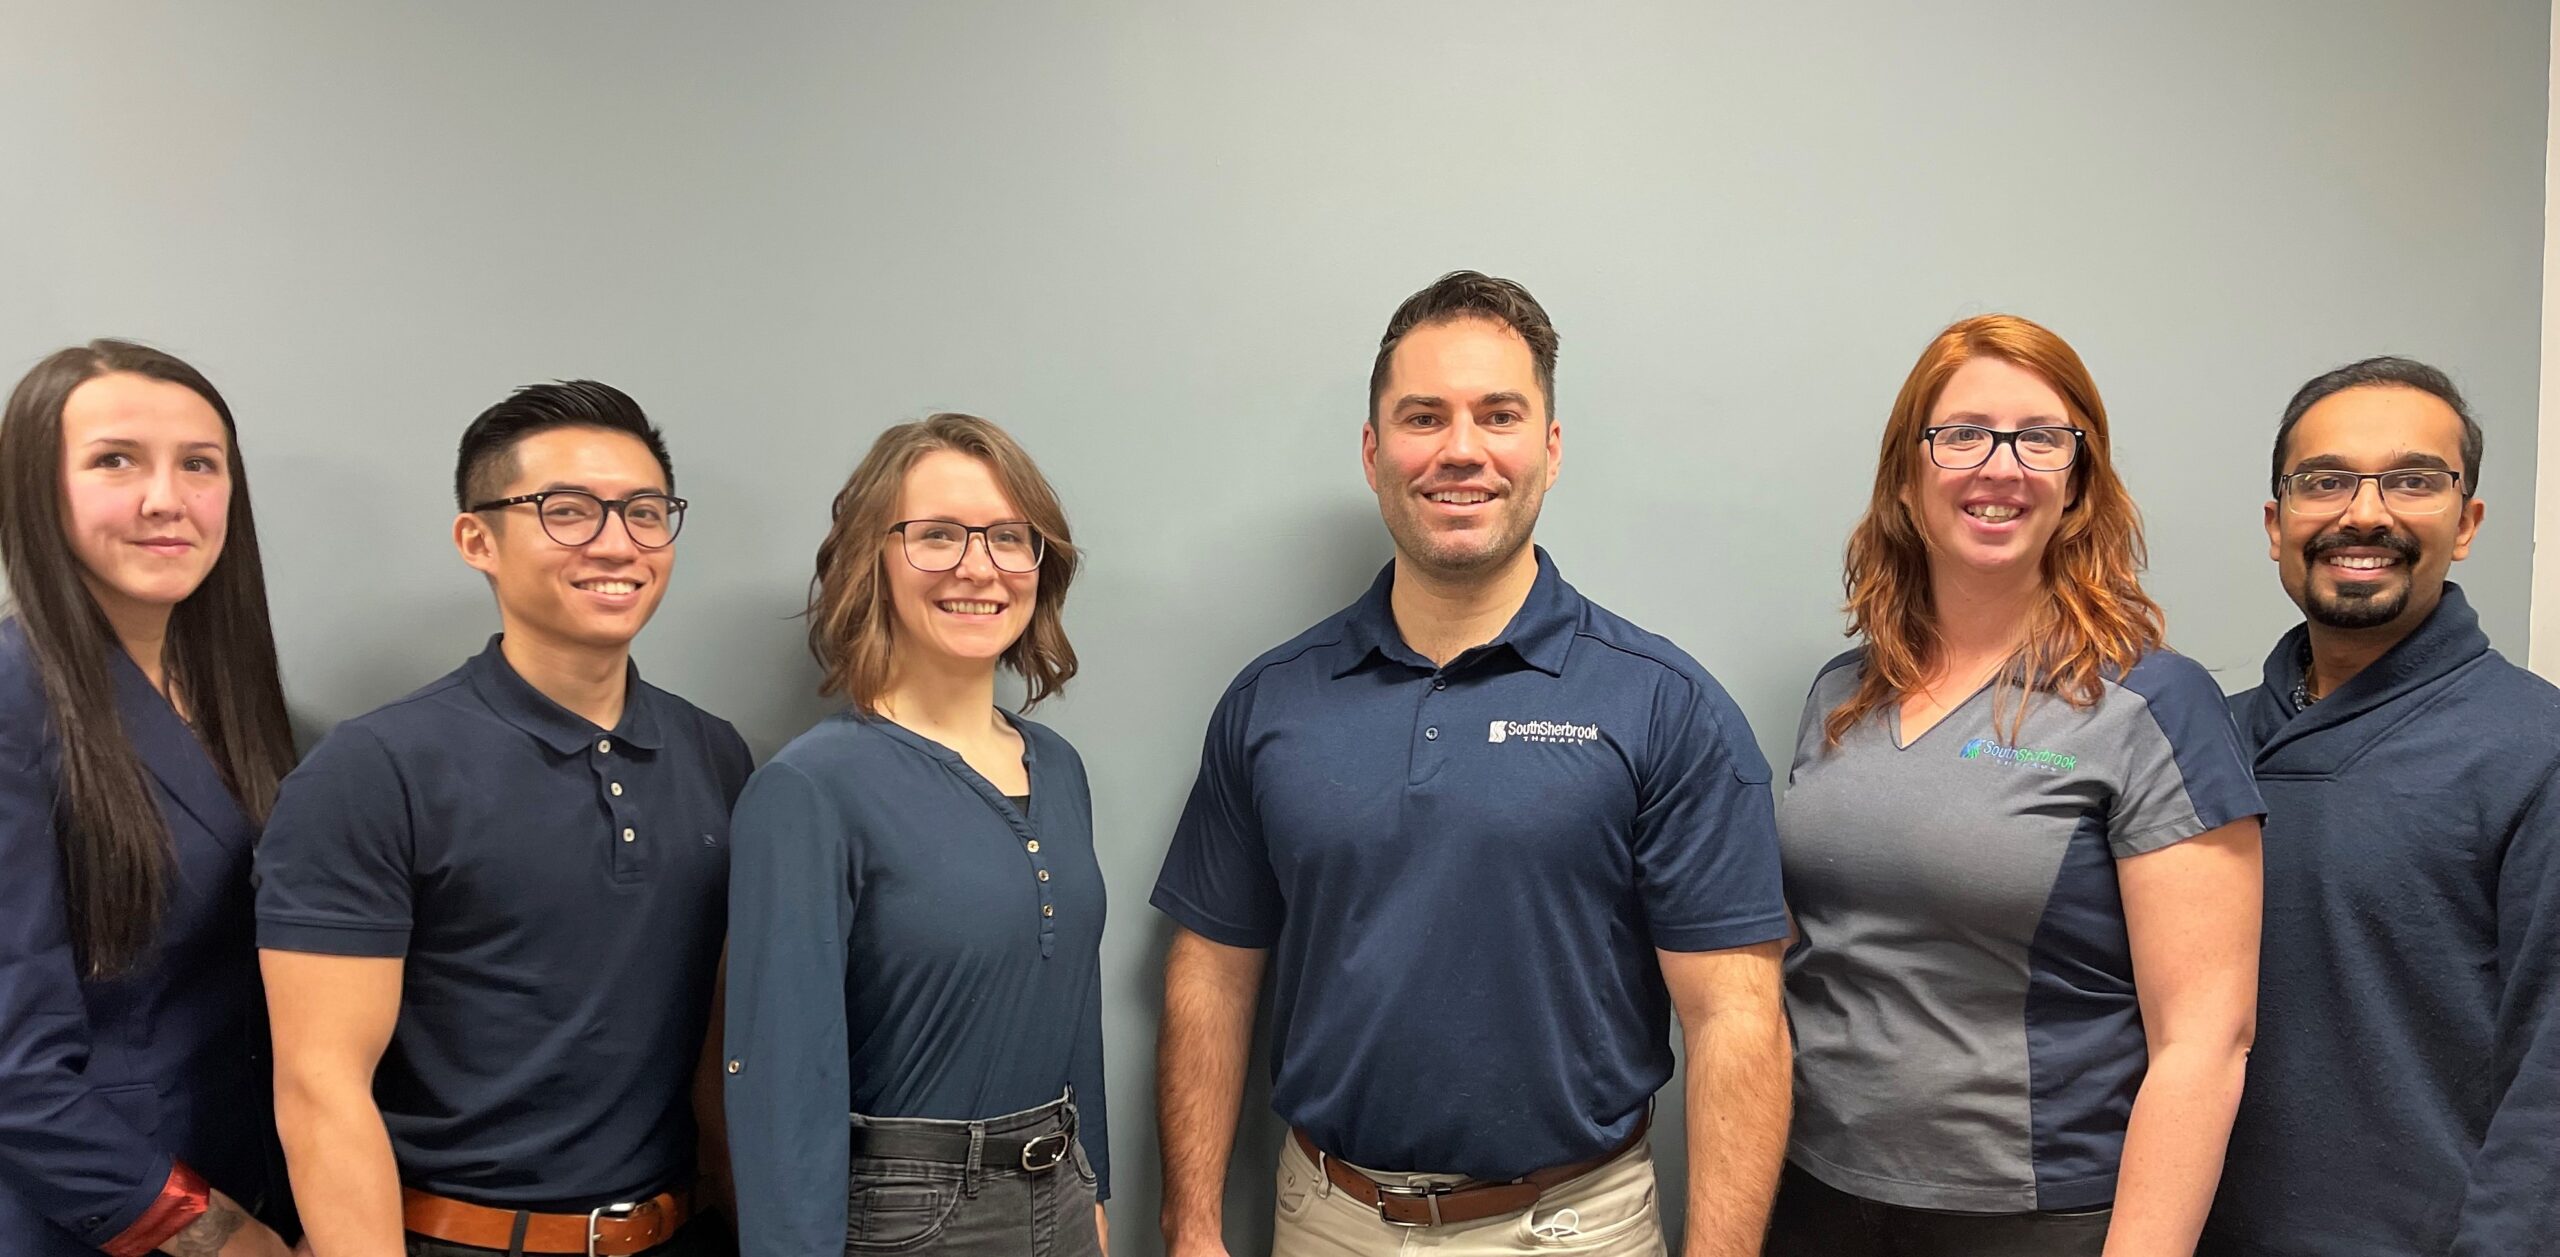 South Sherbrook Physical Therapy Clinic Team Photo